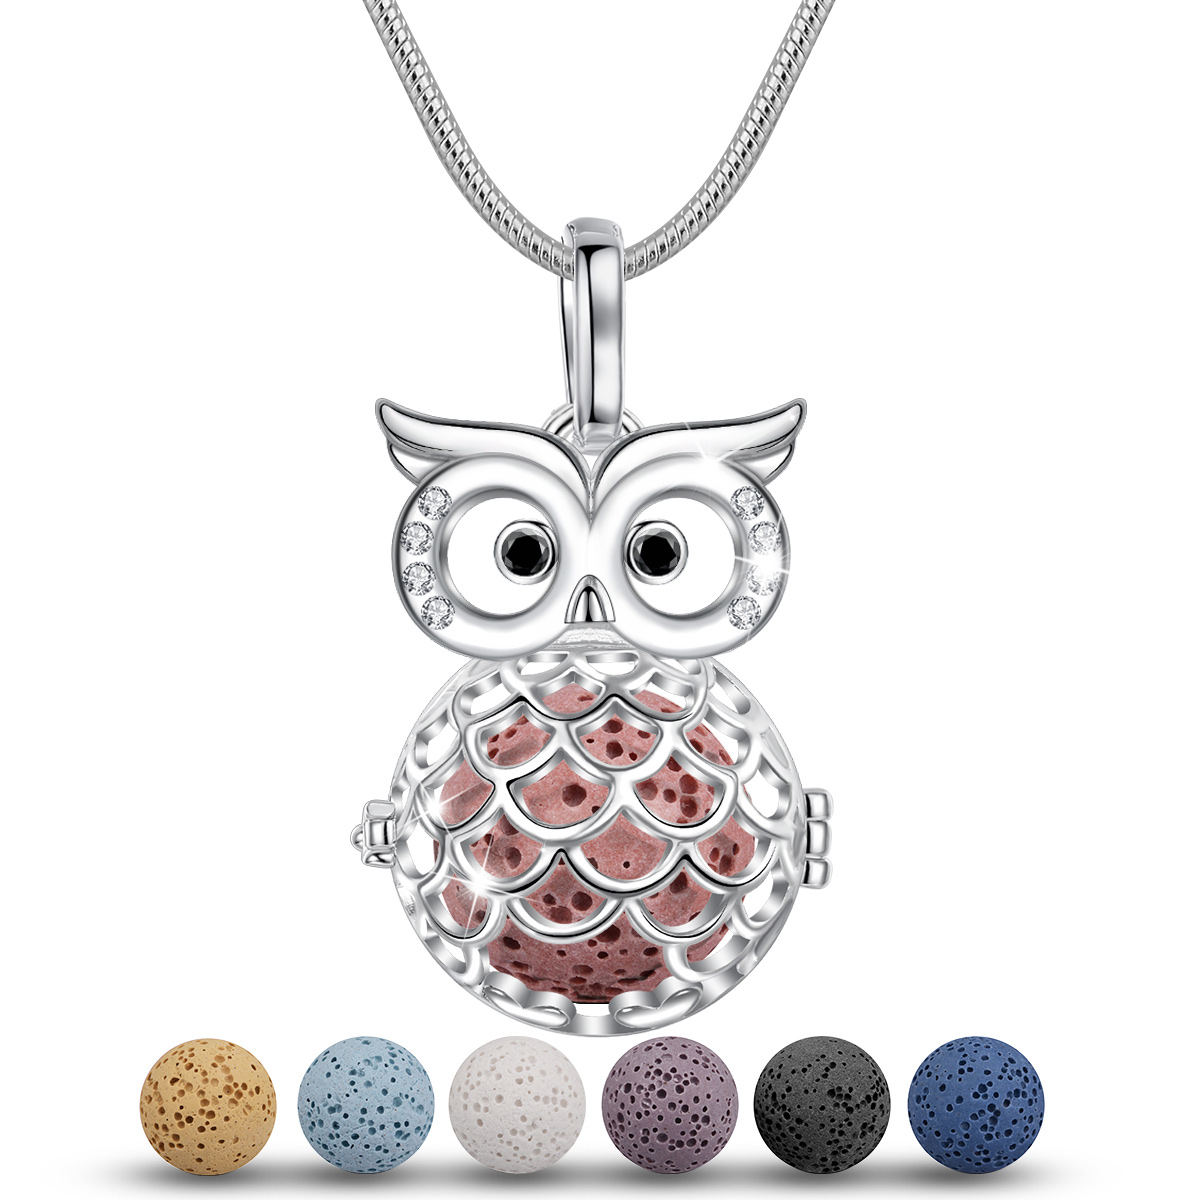 Merryshine Jewelry Copper Plating Silver Owl Shape Essential Oil Diffuser Aromatherapy Necklace With 14mm Lava Stone